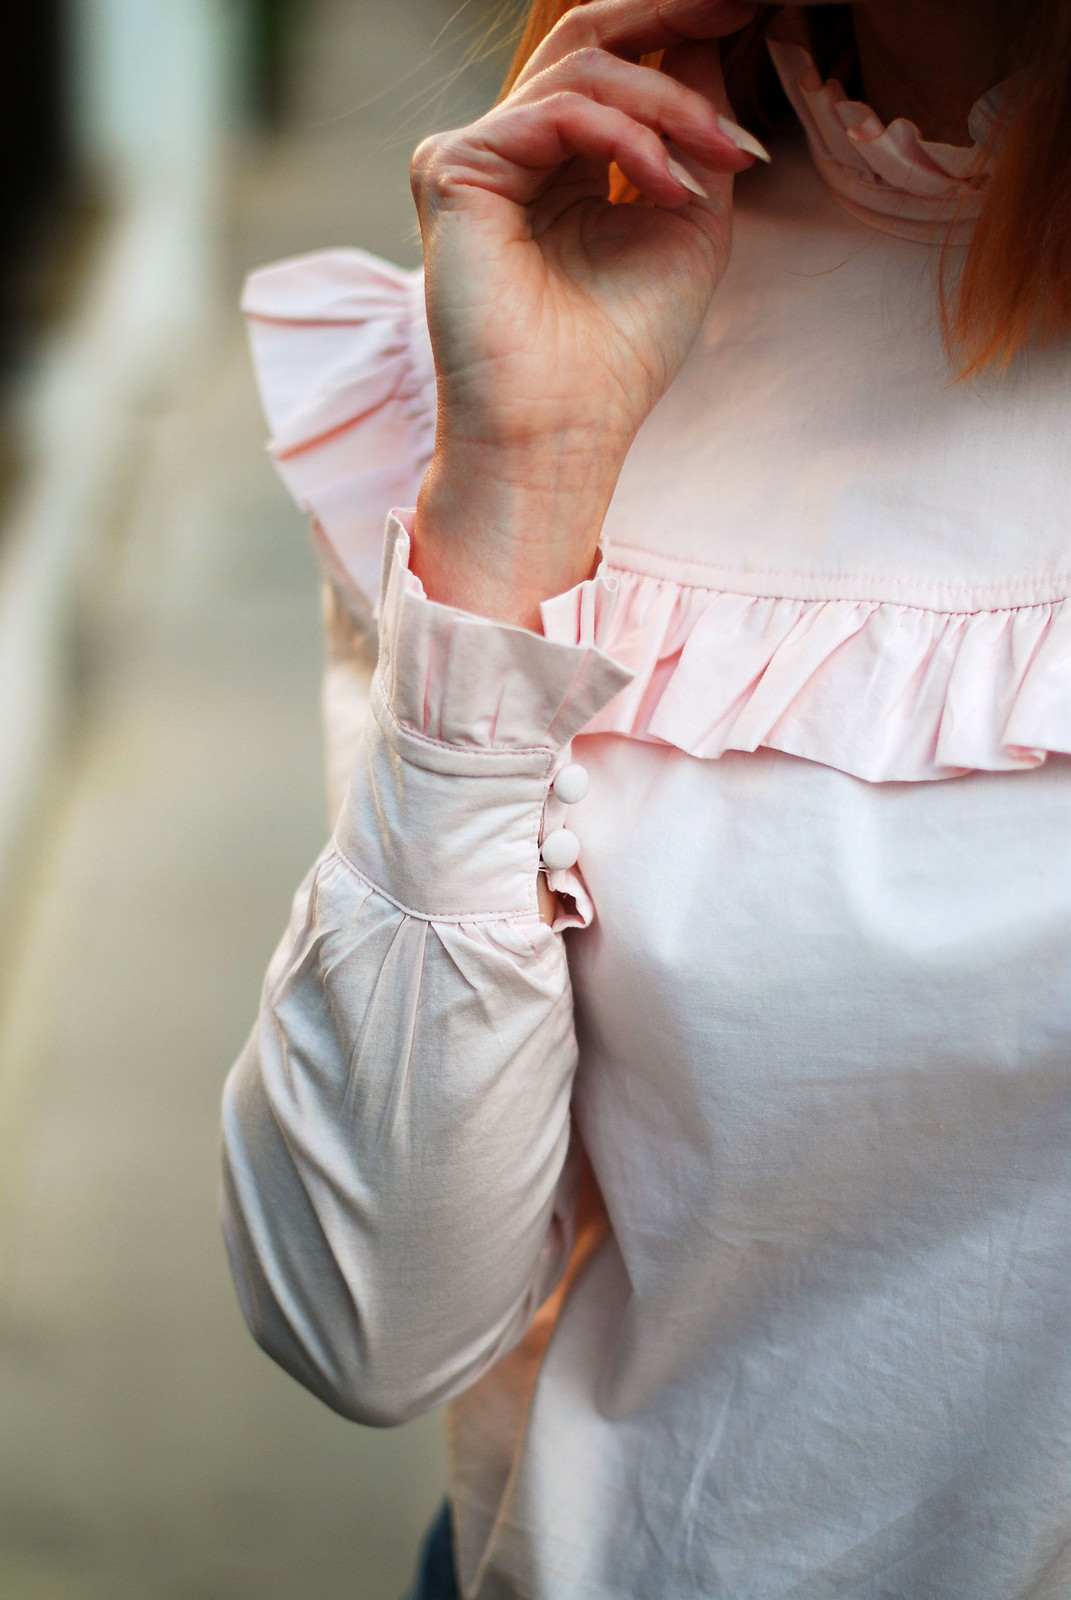 SS16 Style: M&S Archive by Alexa ruffled Harry blouse | Not Dressed As Lamb